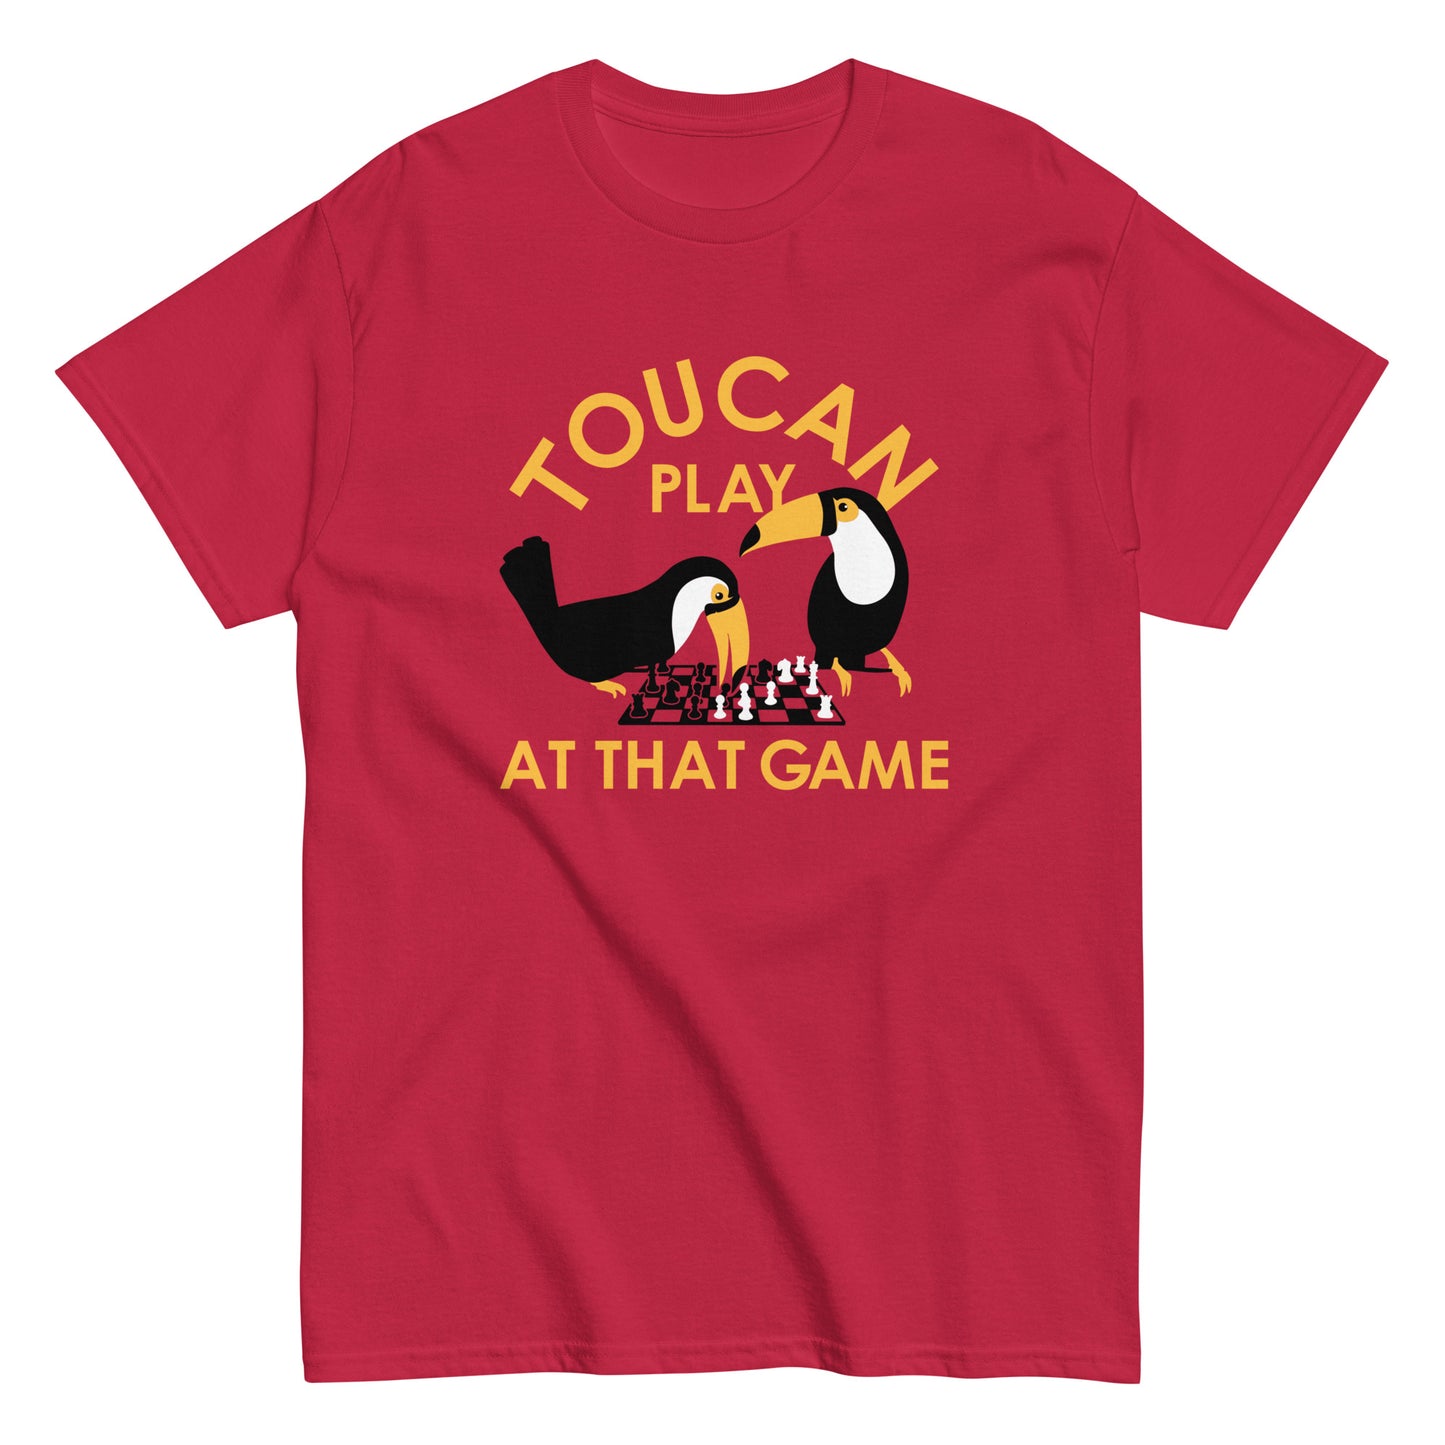 Toucan Play At That Game Men's Classic Tee